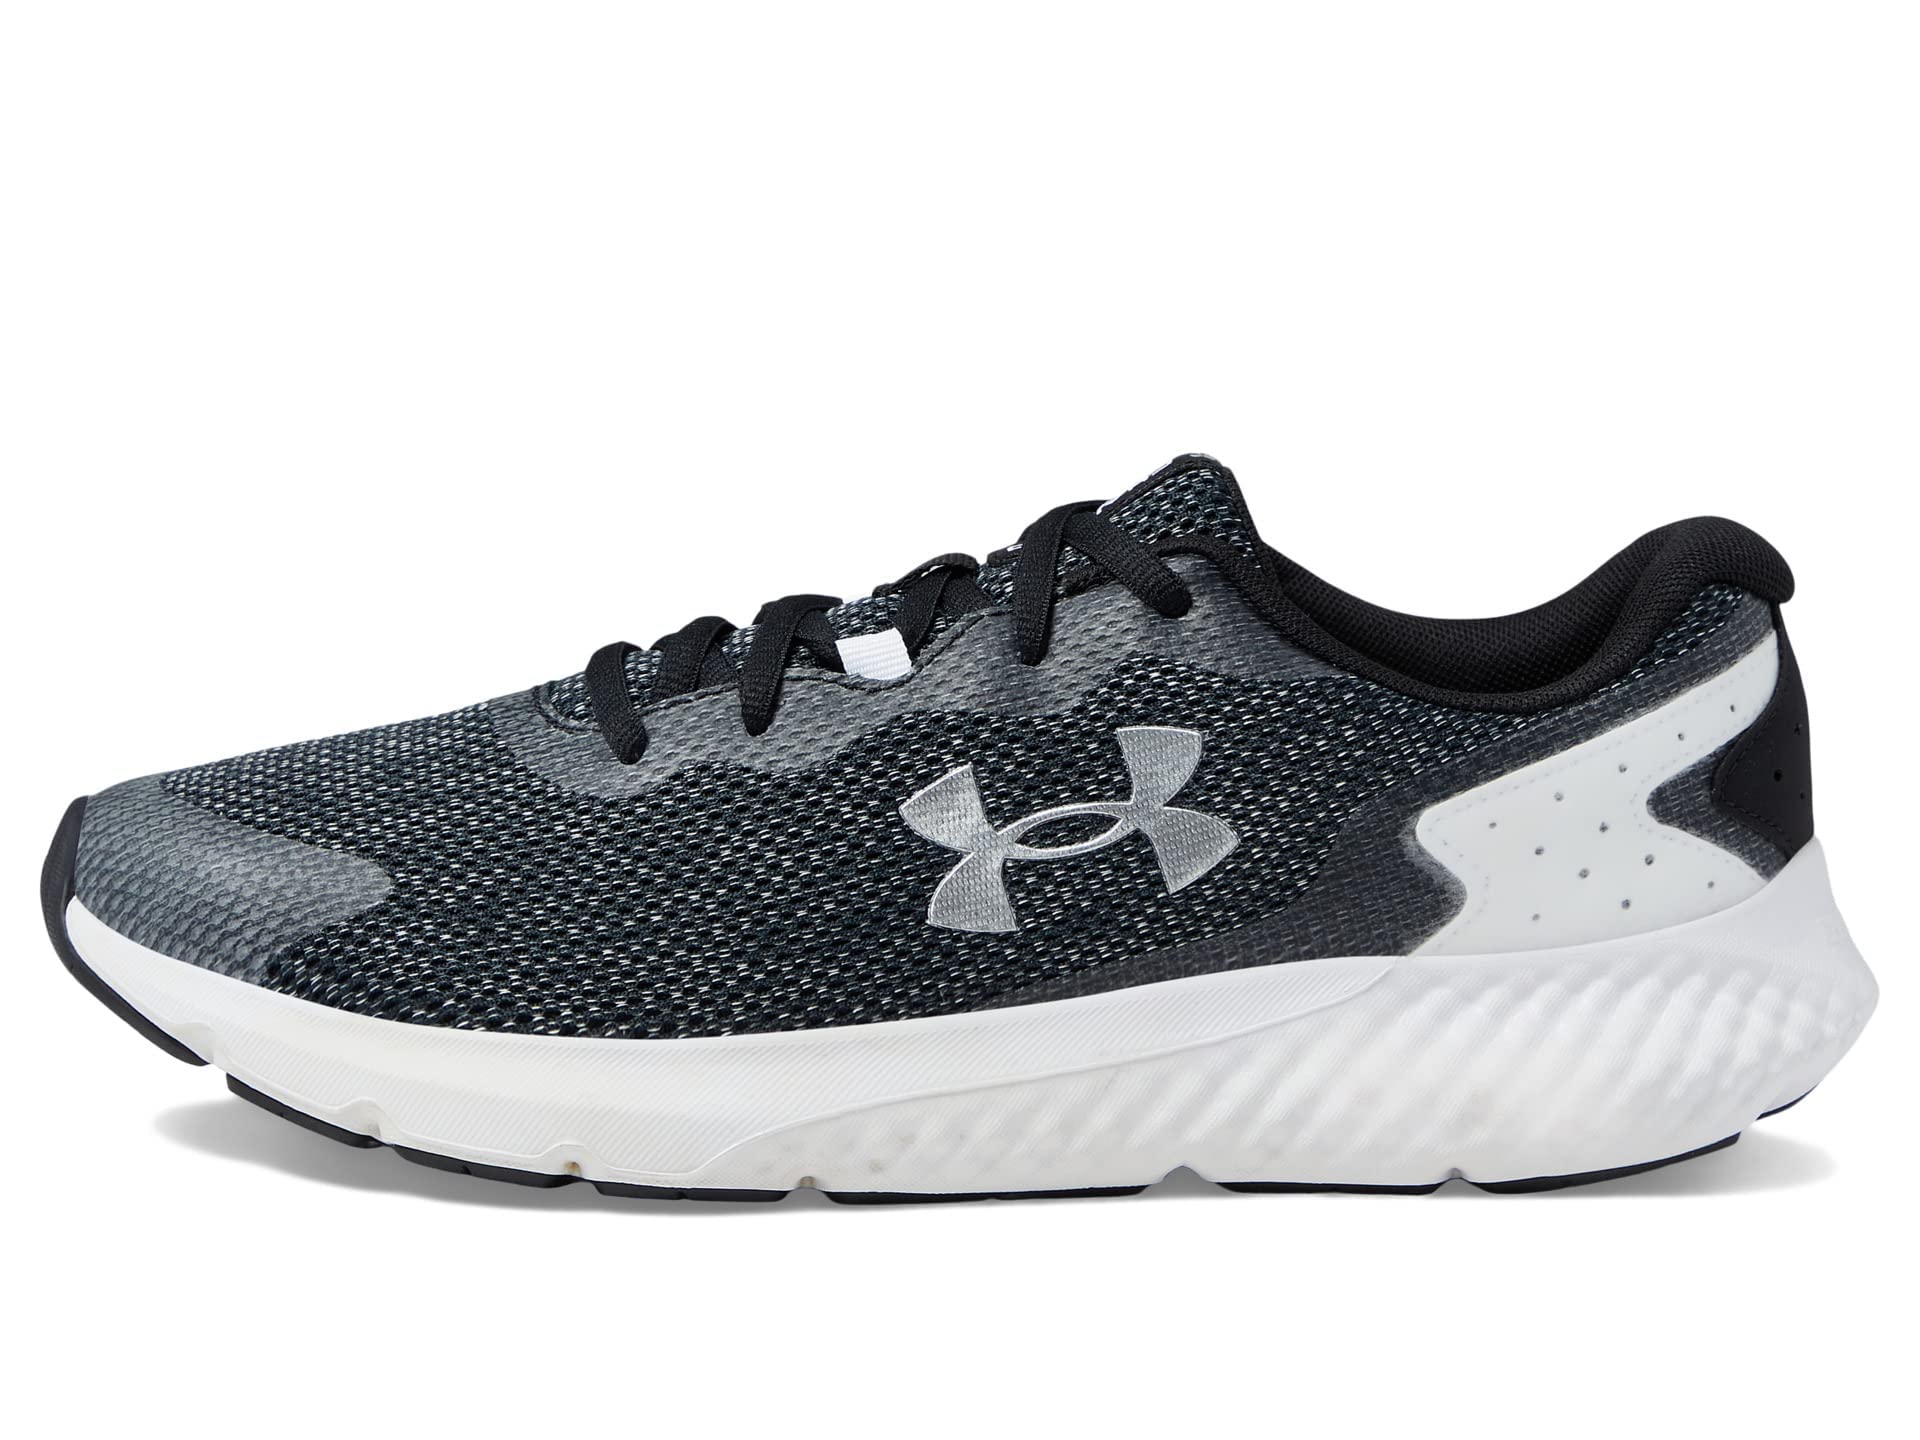 Under Armour Men's Charged Rogue 3 Knit Running Shoe